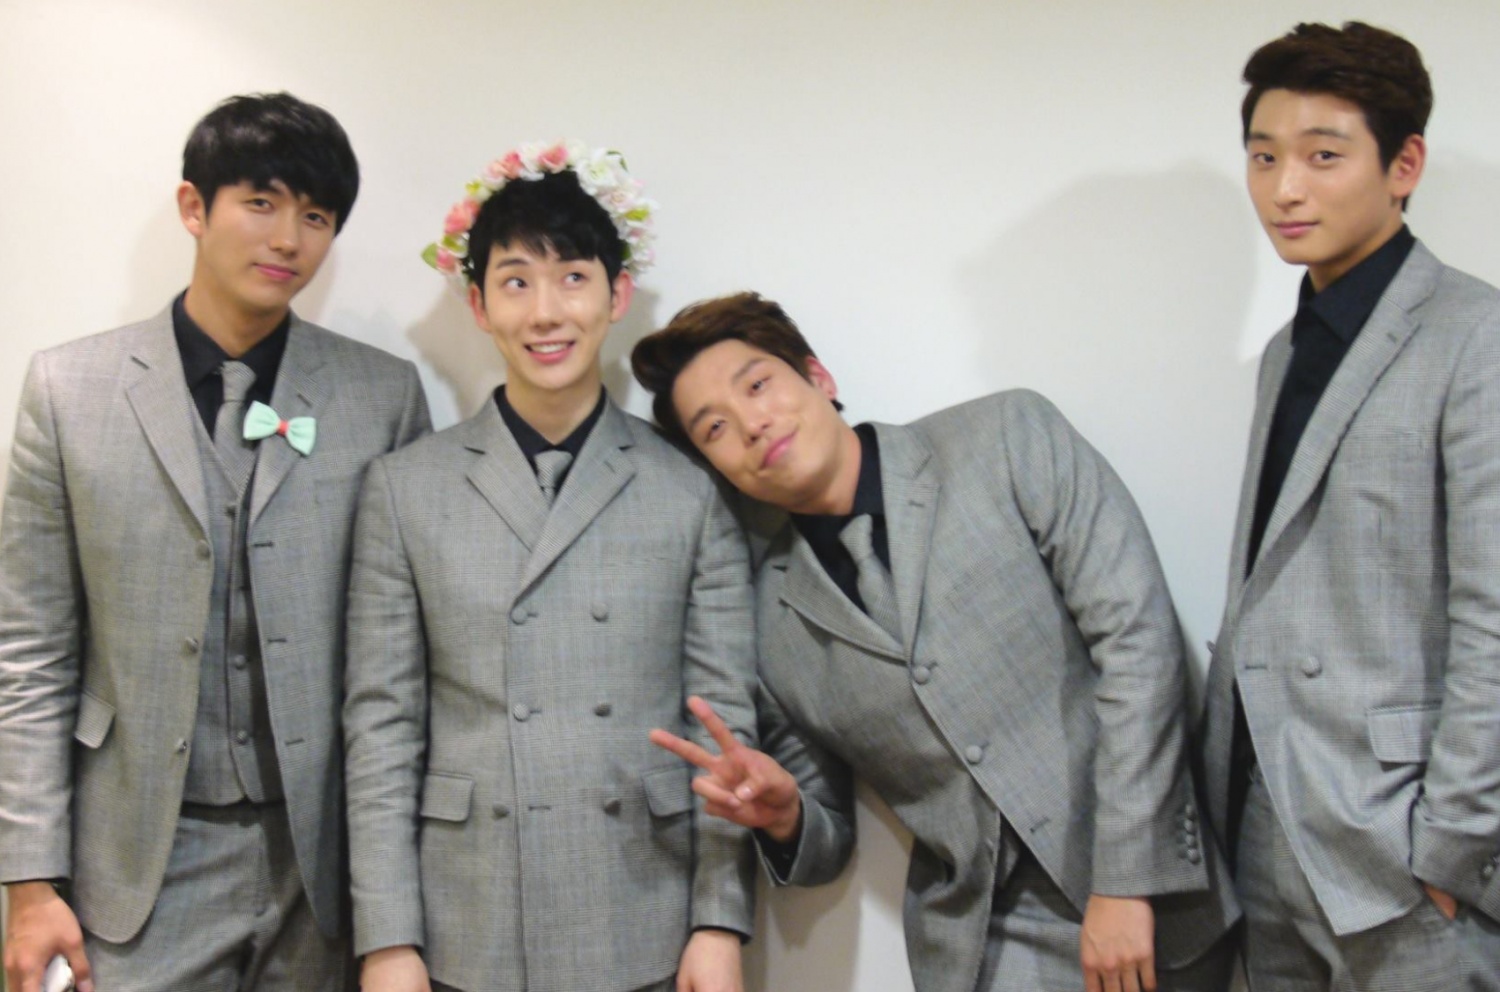 Where is 2AM Now? The Half of the One Big Group 'One Day' that Also Consisted of 2PM